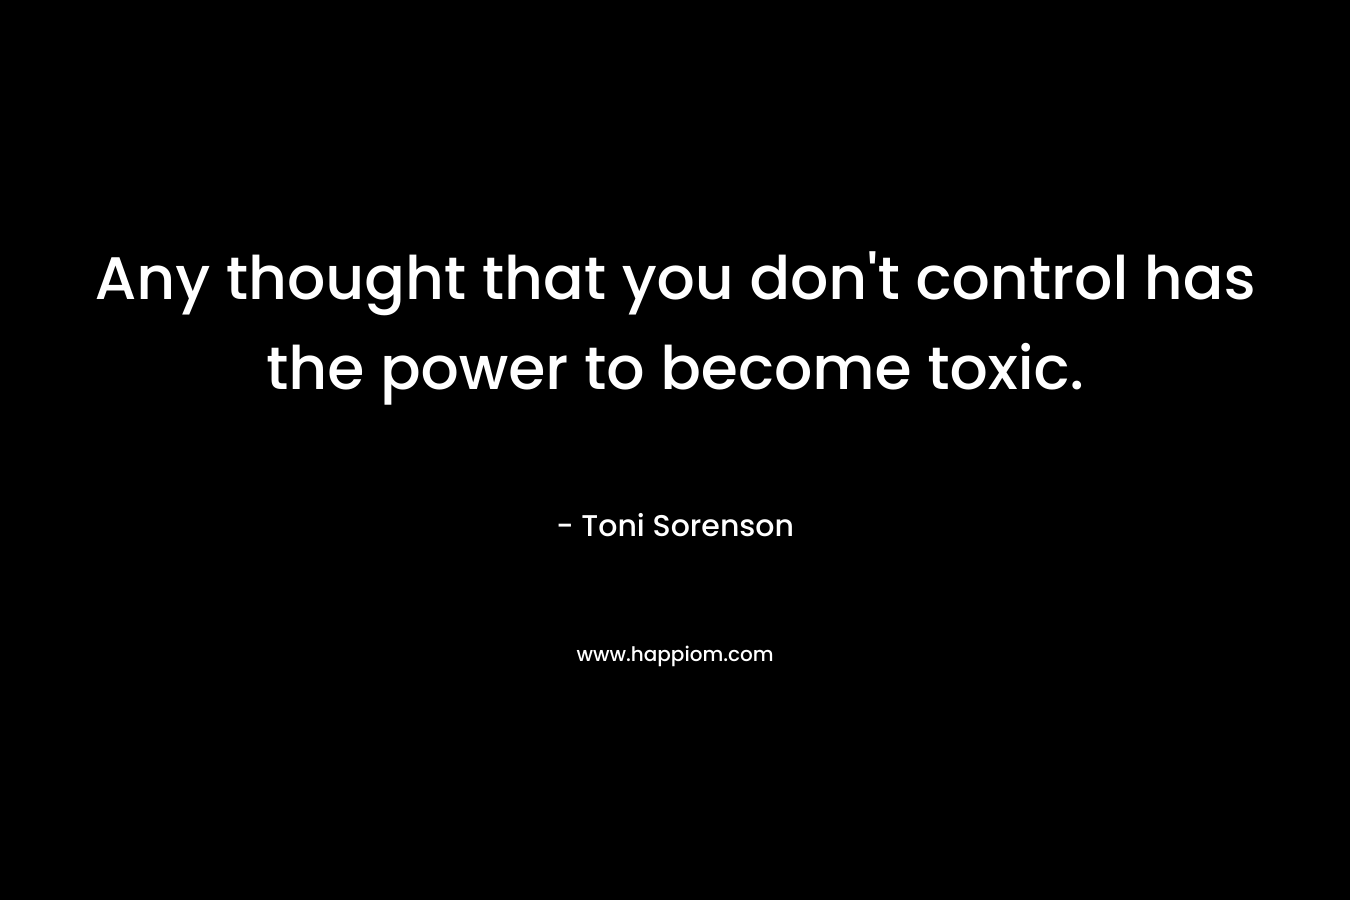 Any thought that you don't control has the power to become toxic.